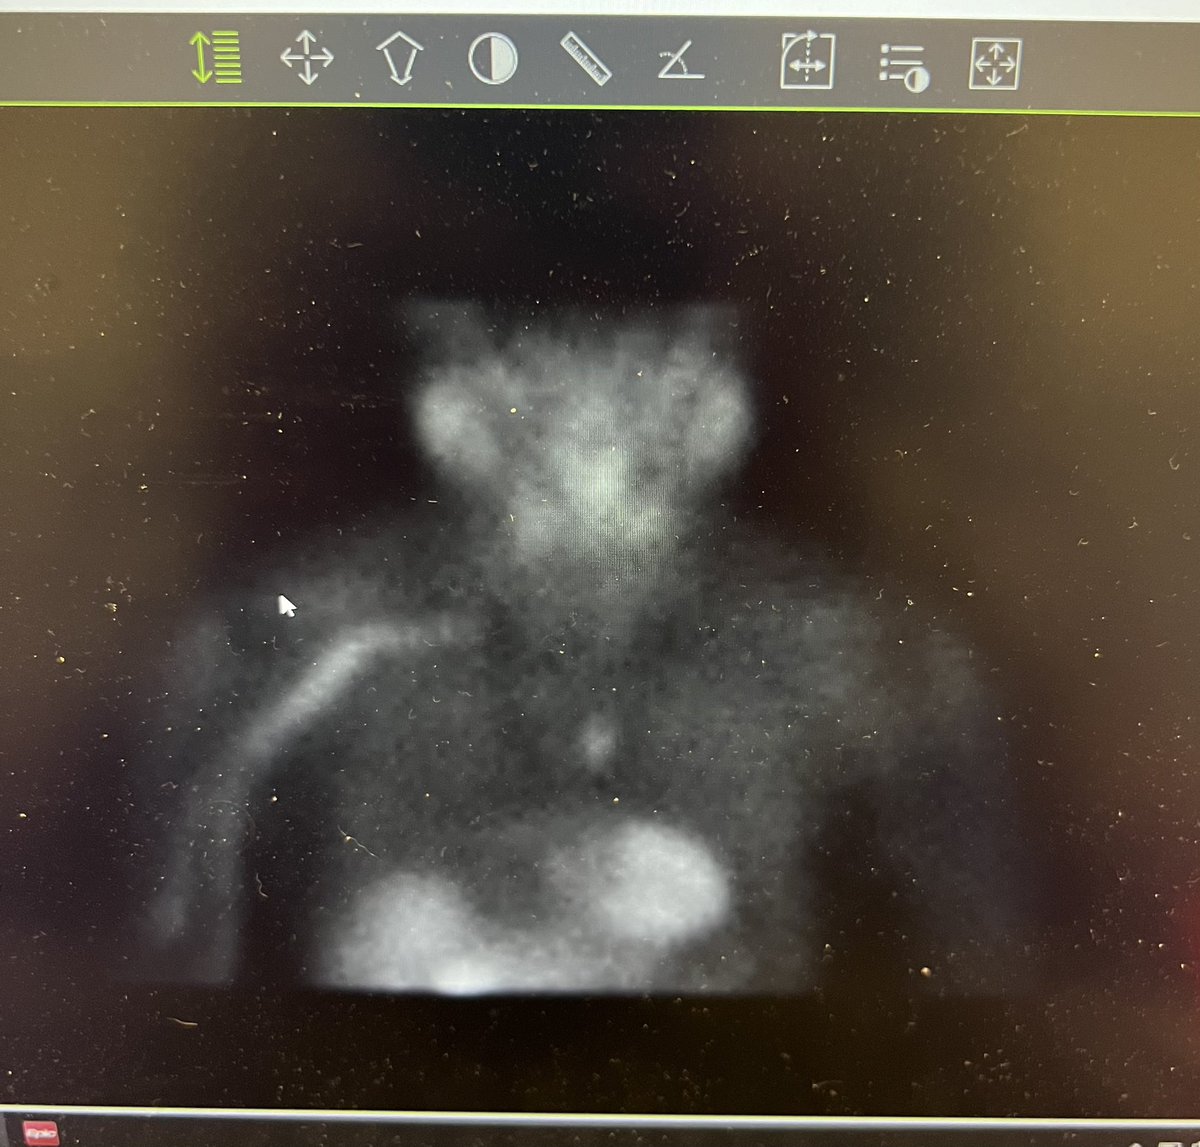 It's that time....  THORACIC THURSDAY!!

56yo M comes with kidney stones, some pain, with the scan below.

1) What abnormality would you see on labs?

2) how would you approach this?

3) is there anything you would do different intraoperatively?

#thoracicthursday #meded #surged